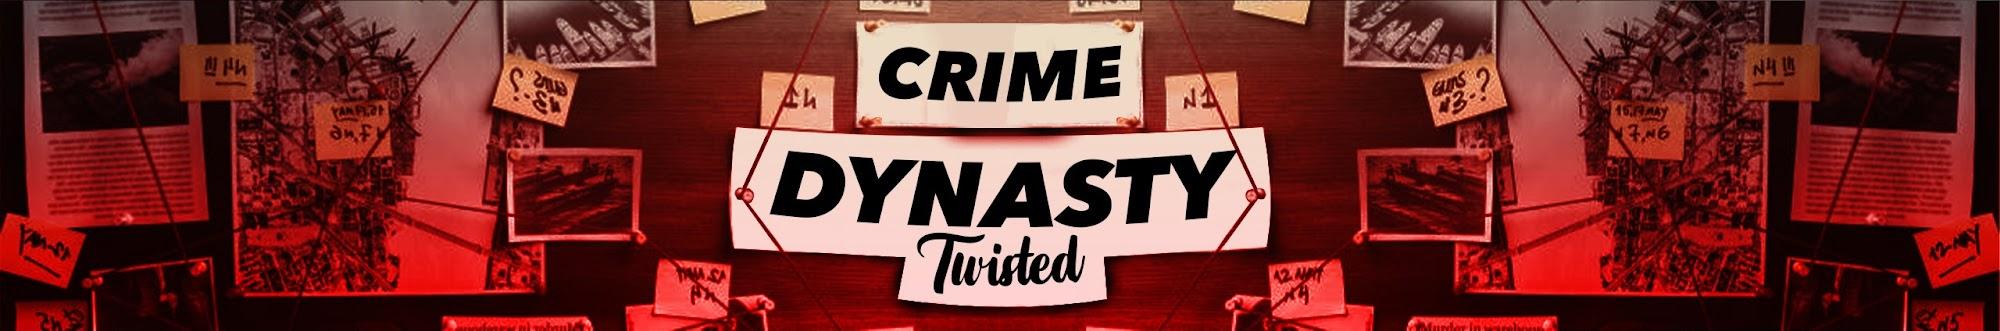 Crime Dynasty Twisted